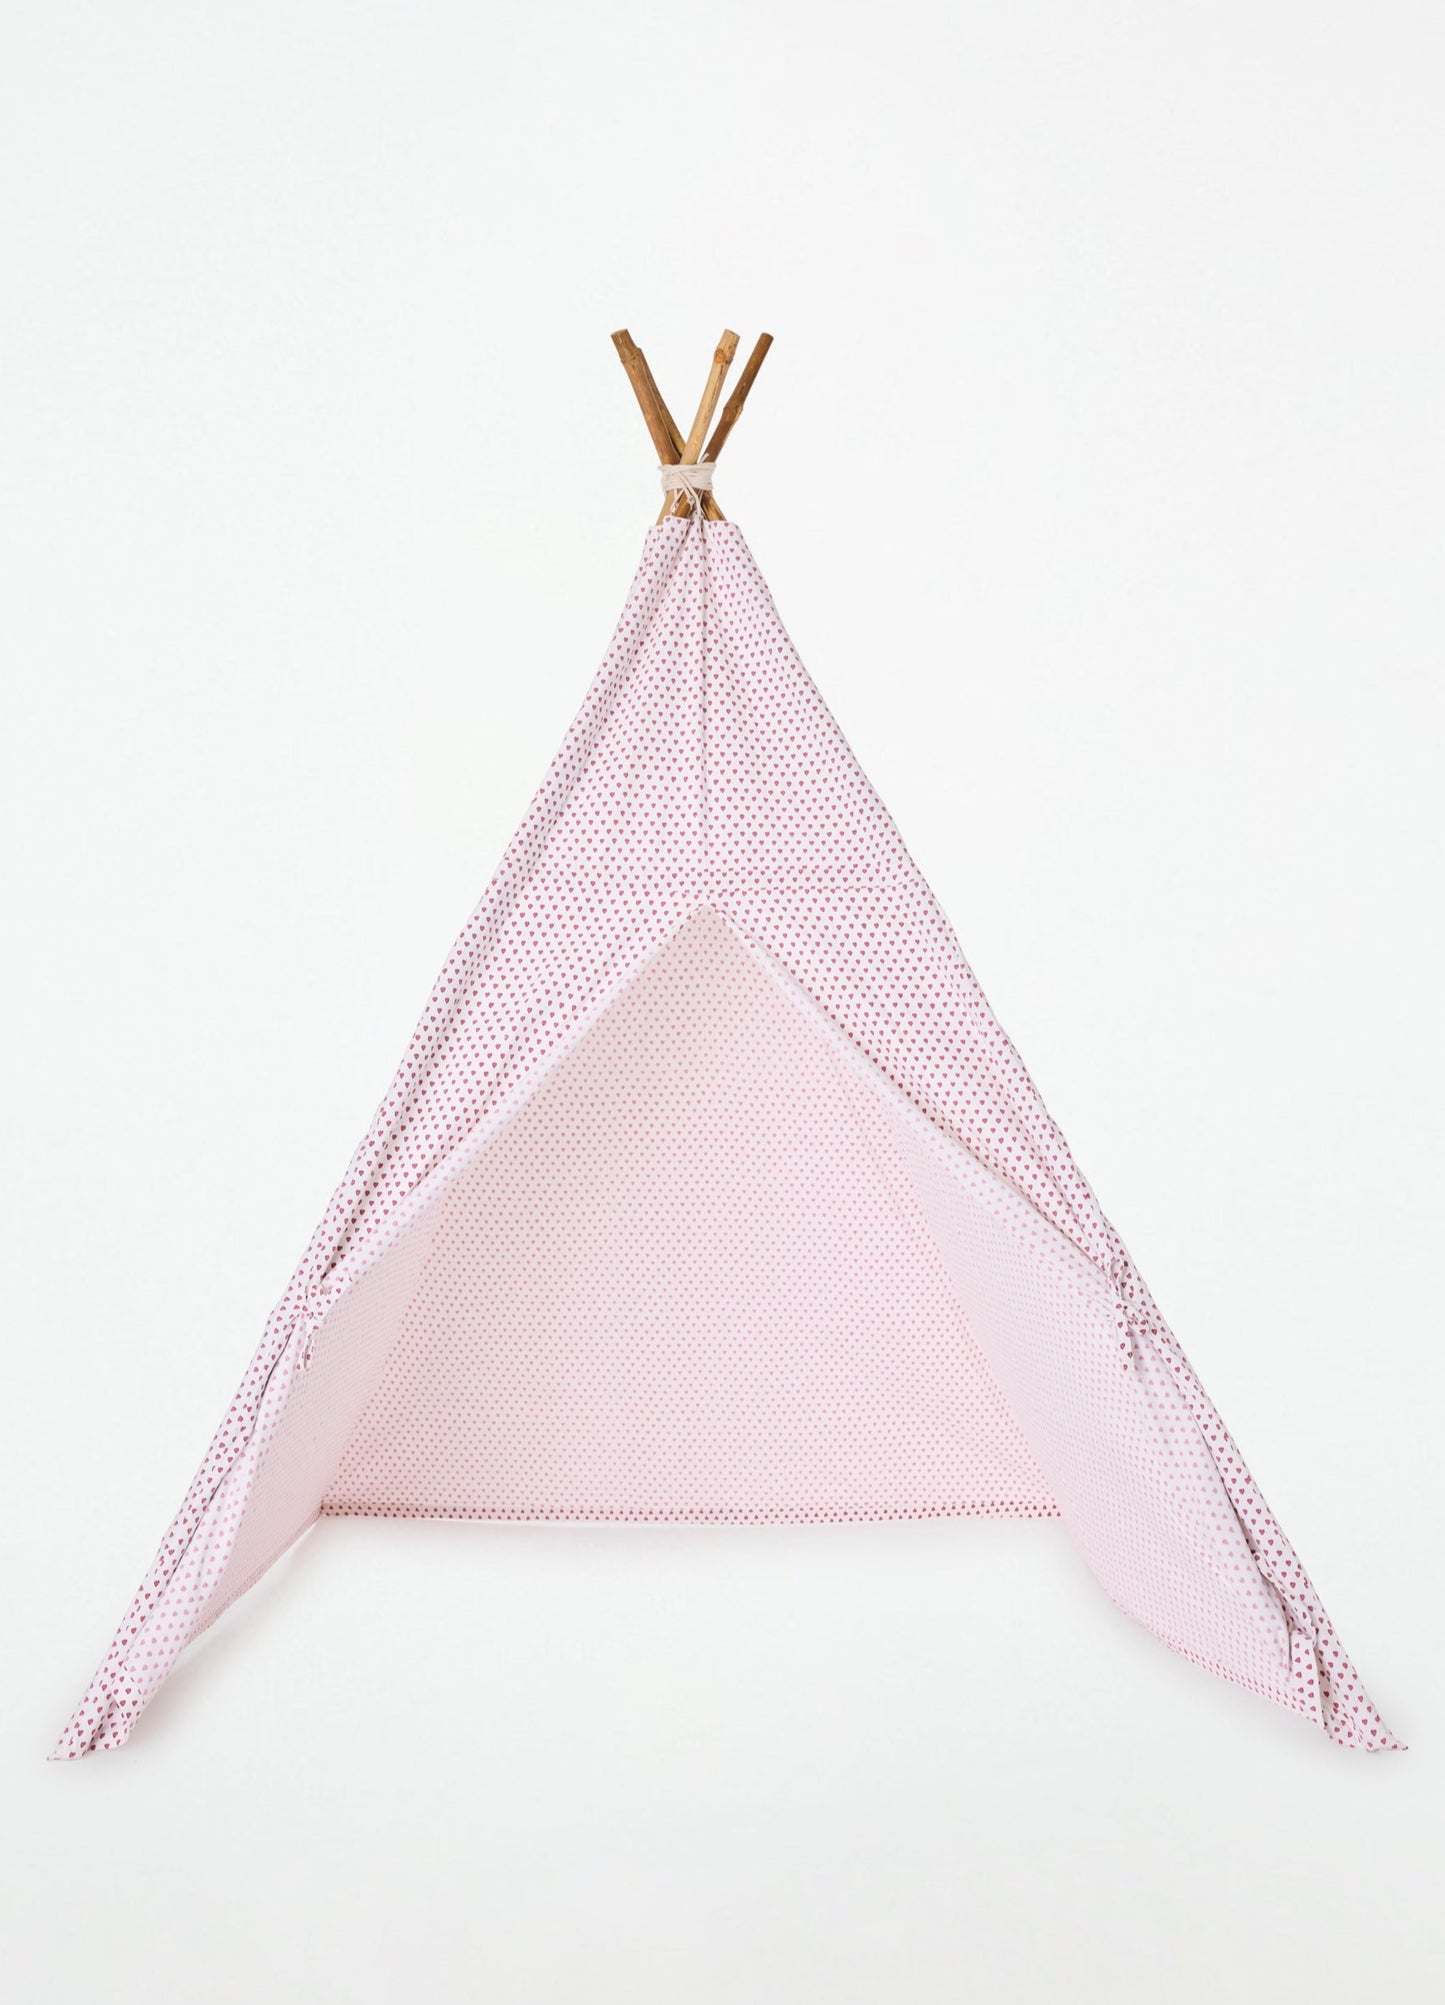 Roller Rabbit Pink Hearts Play Tent